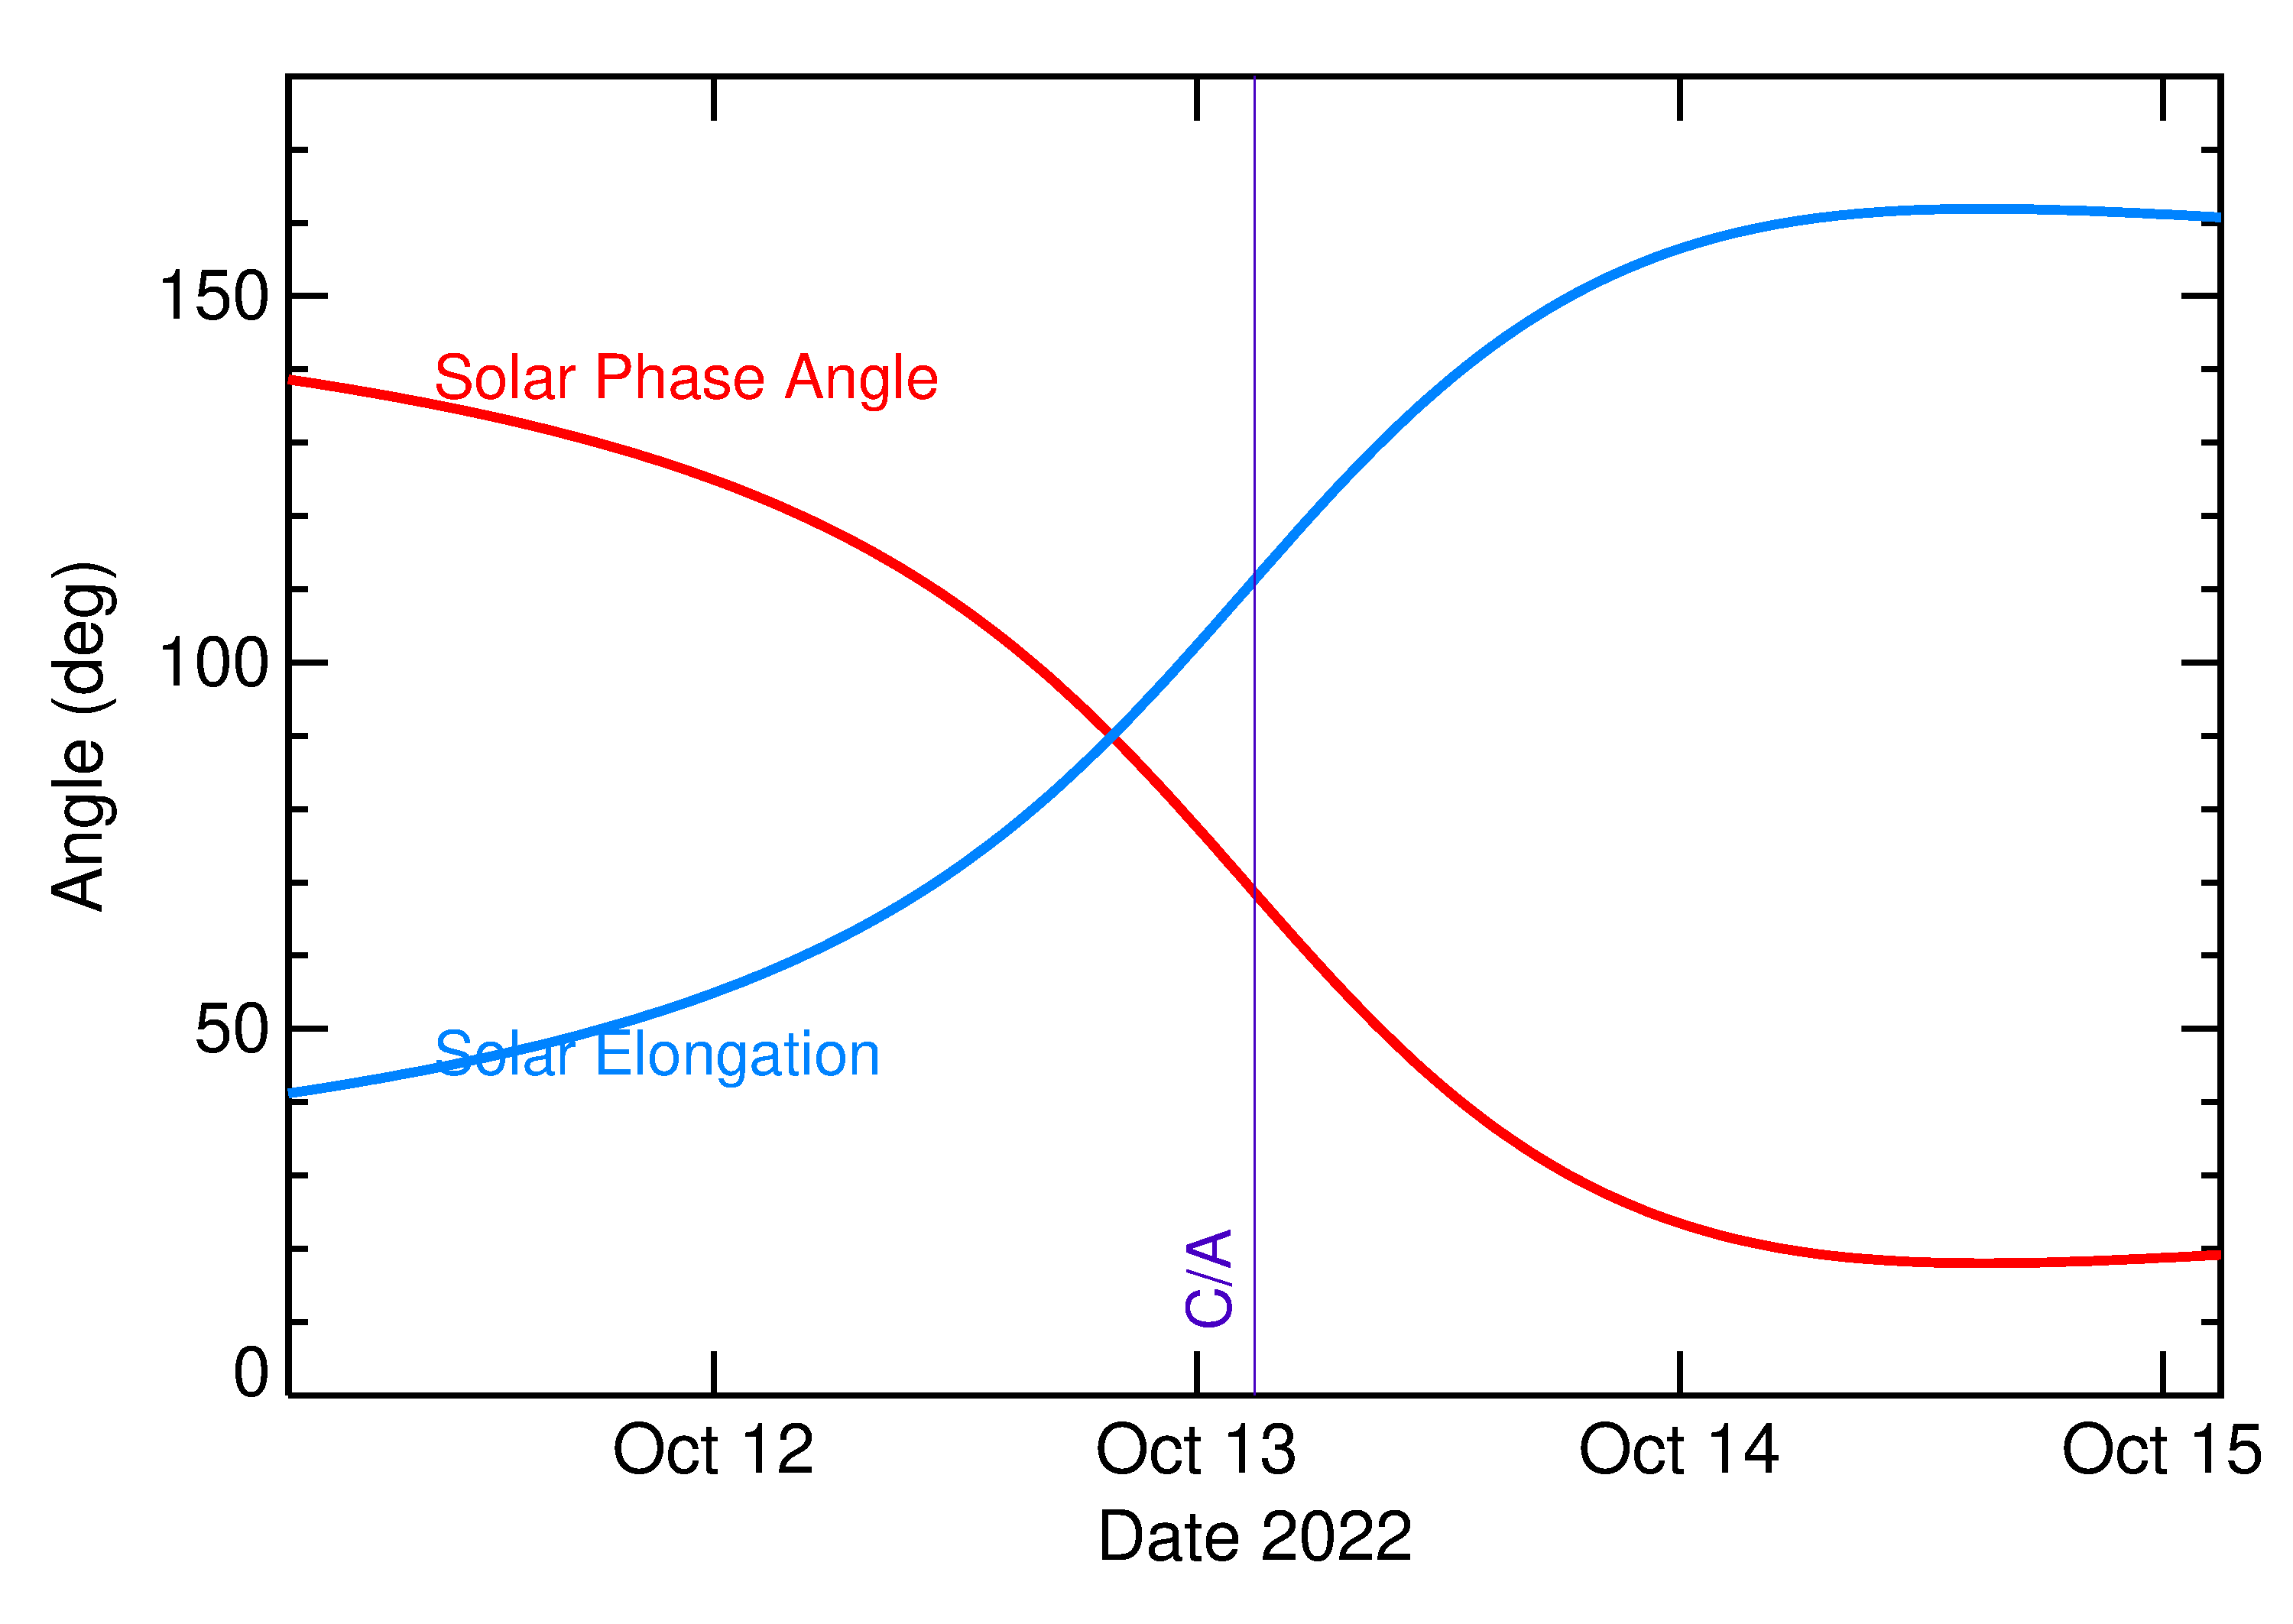 Solar Elongation and Solar Phase Angle of 2022 TW2 in the days around closest approach